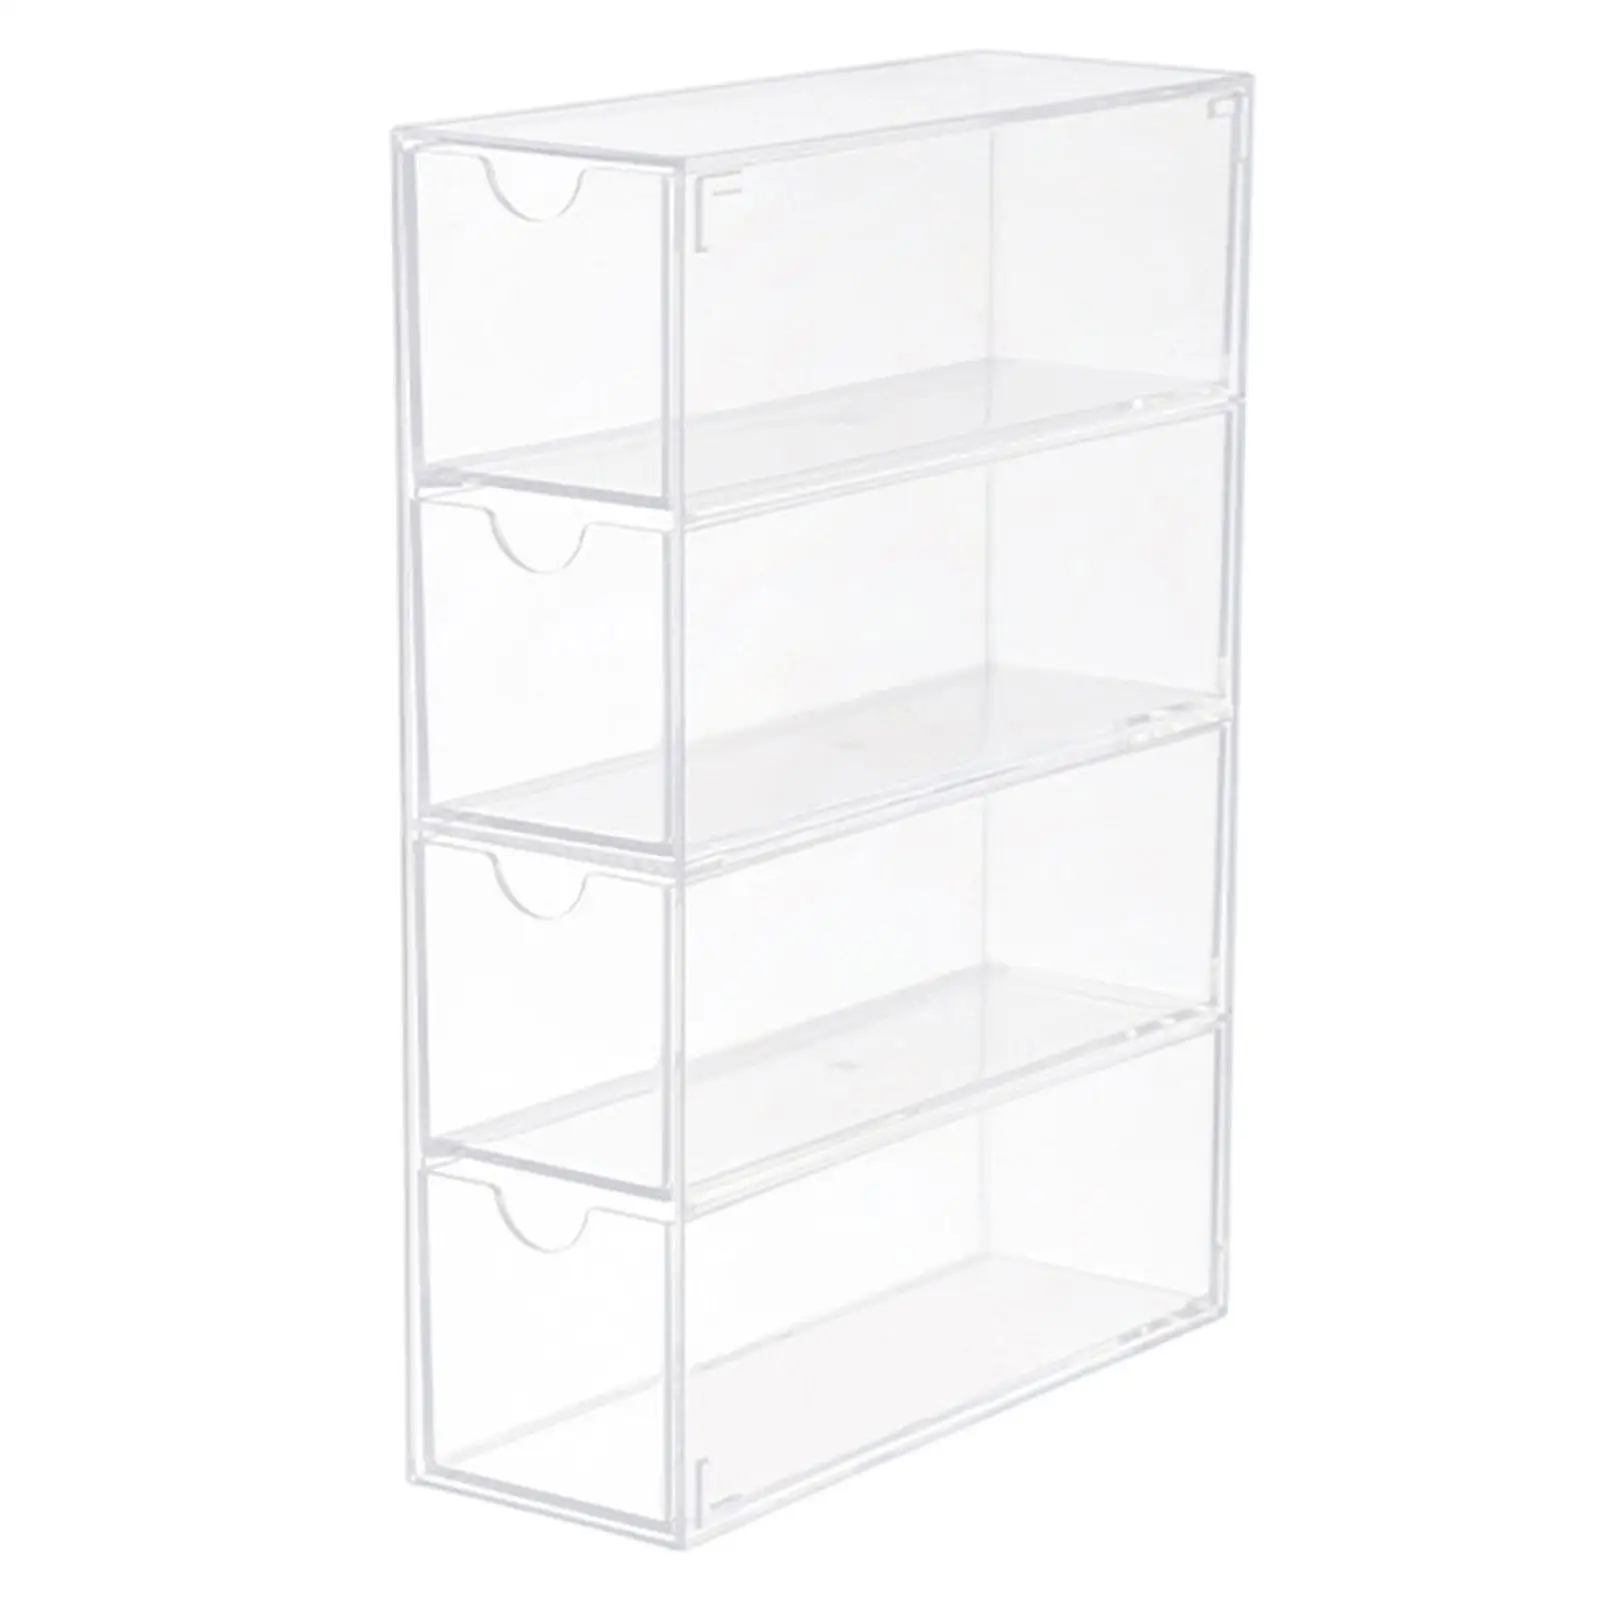 Makeup Organizer 4 Drawers Acrylic Clear Storage Box Container Cosmetic Desk Rack for Countertops Home Glasses Lipstick Office